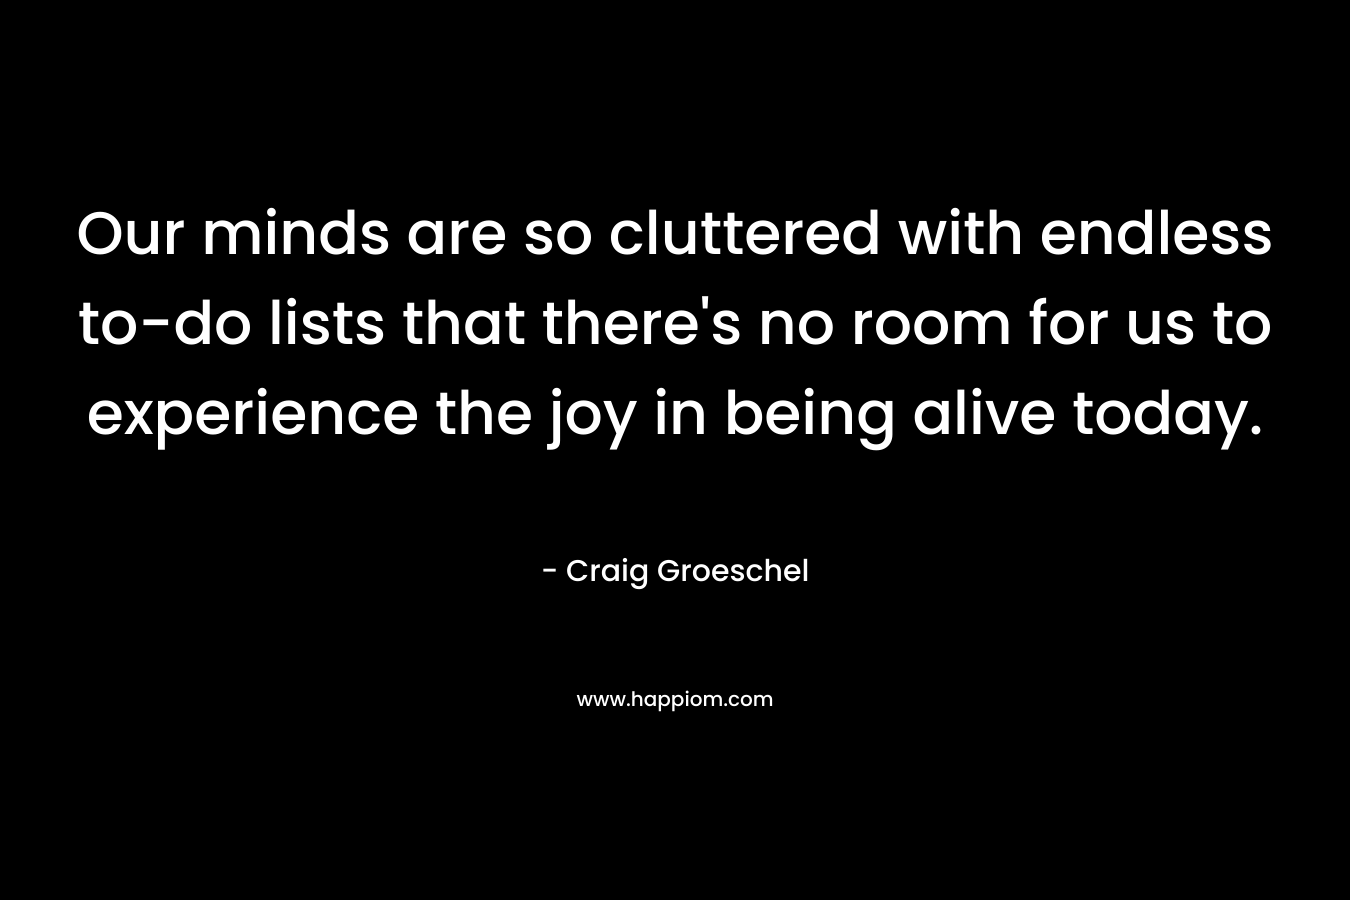 Our minds are so cluttered with endless to-do lists that there’s no room for us to experience the joy in being alive today. – Craig Groeschel